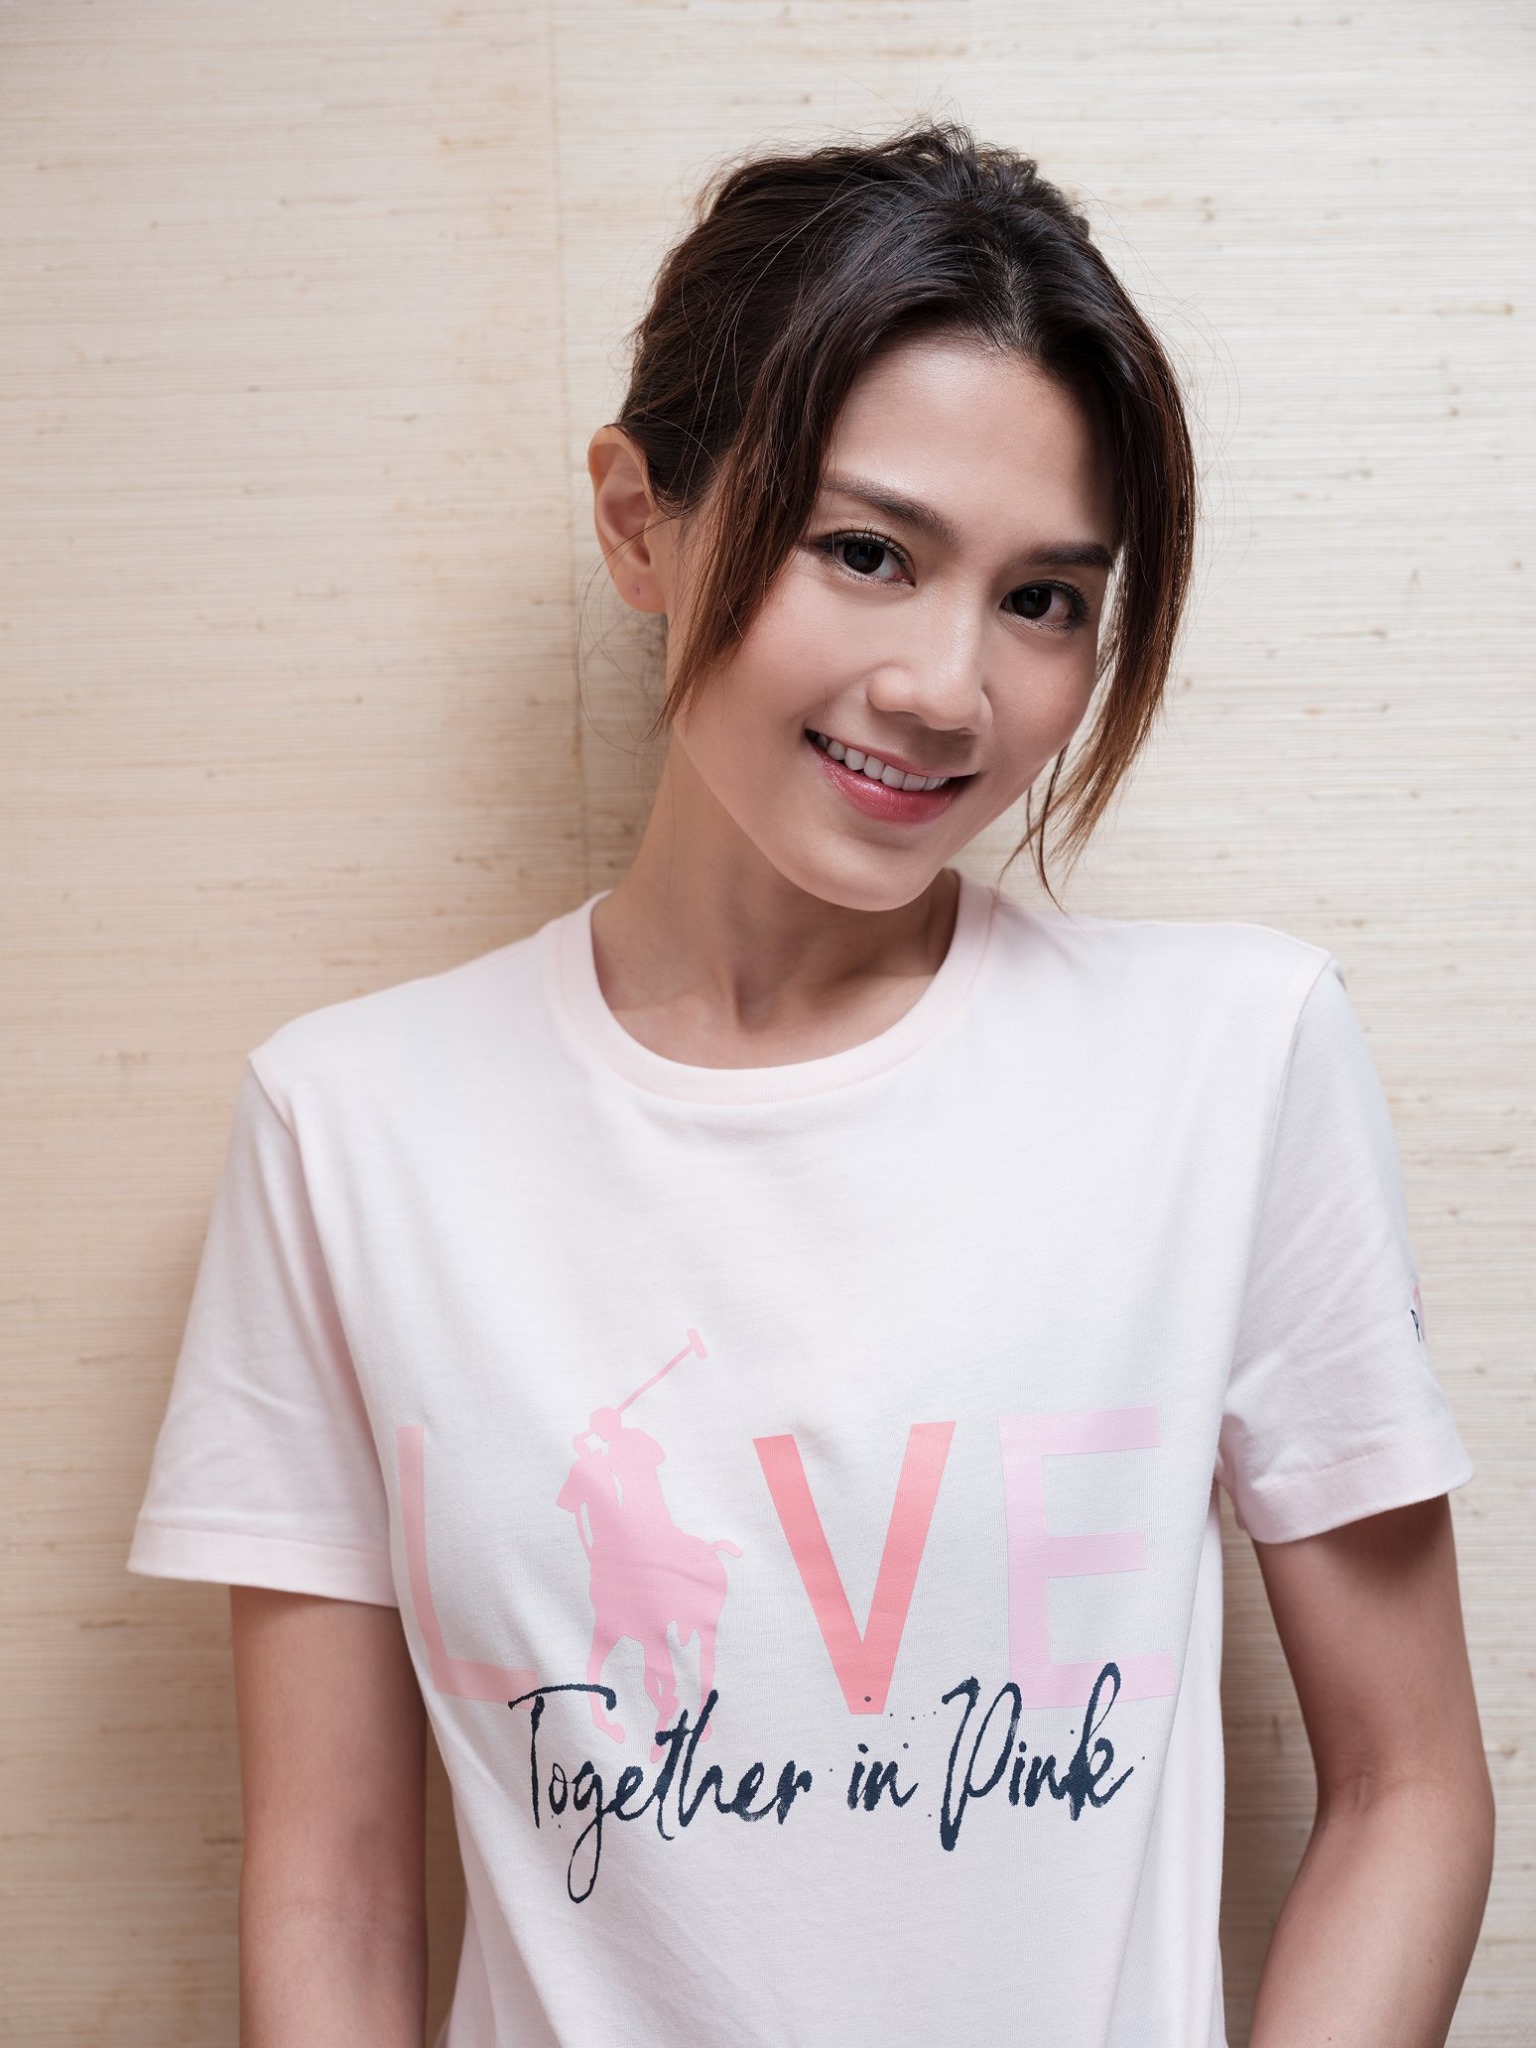 Chrissie Chau 周秀娜 joins us in celebrating the 20th anniversary of #PinkPony wearing this year's Pink Pony Jersey Graphic T-Shirt. Discover the full Pink Pony collection and how you can support: